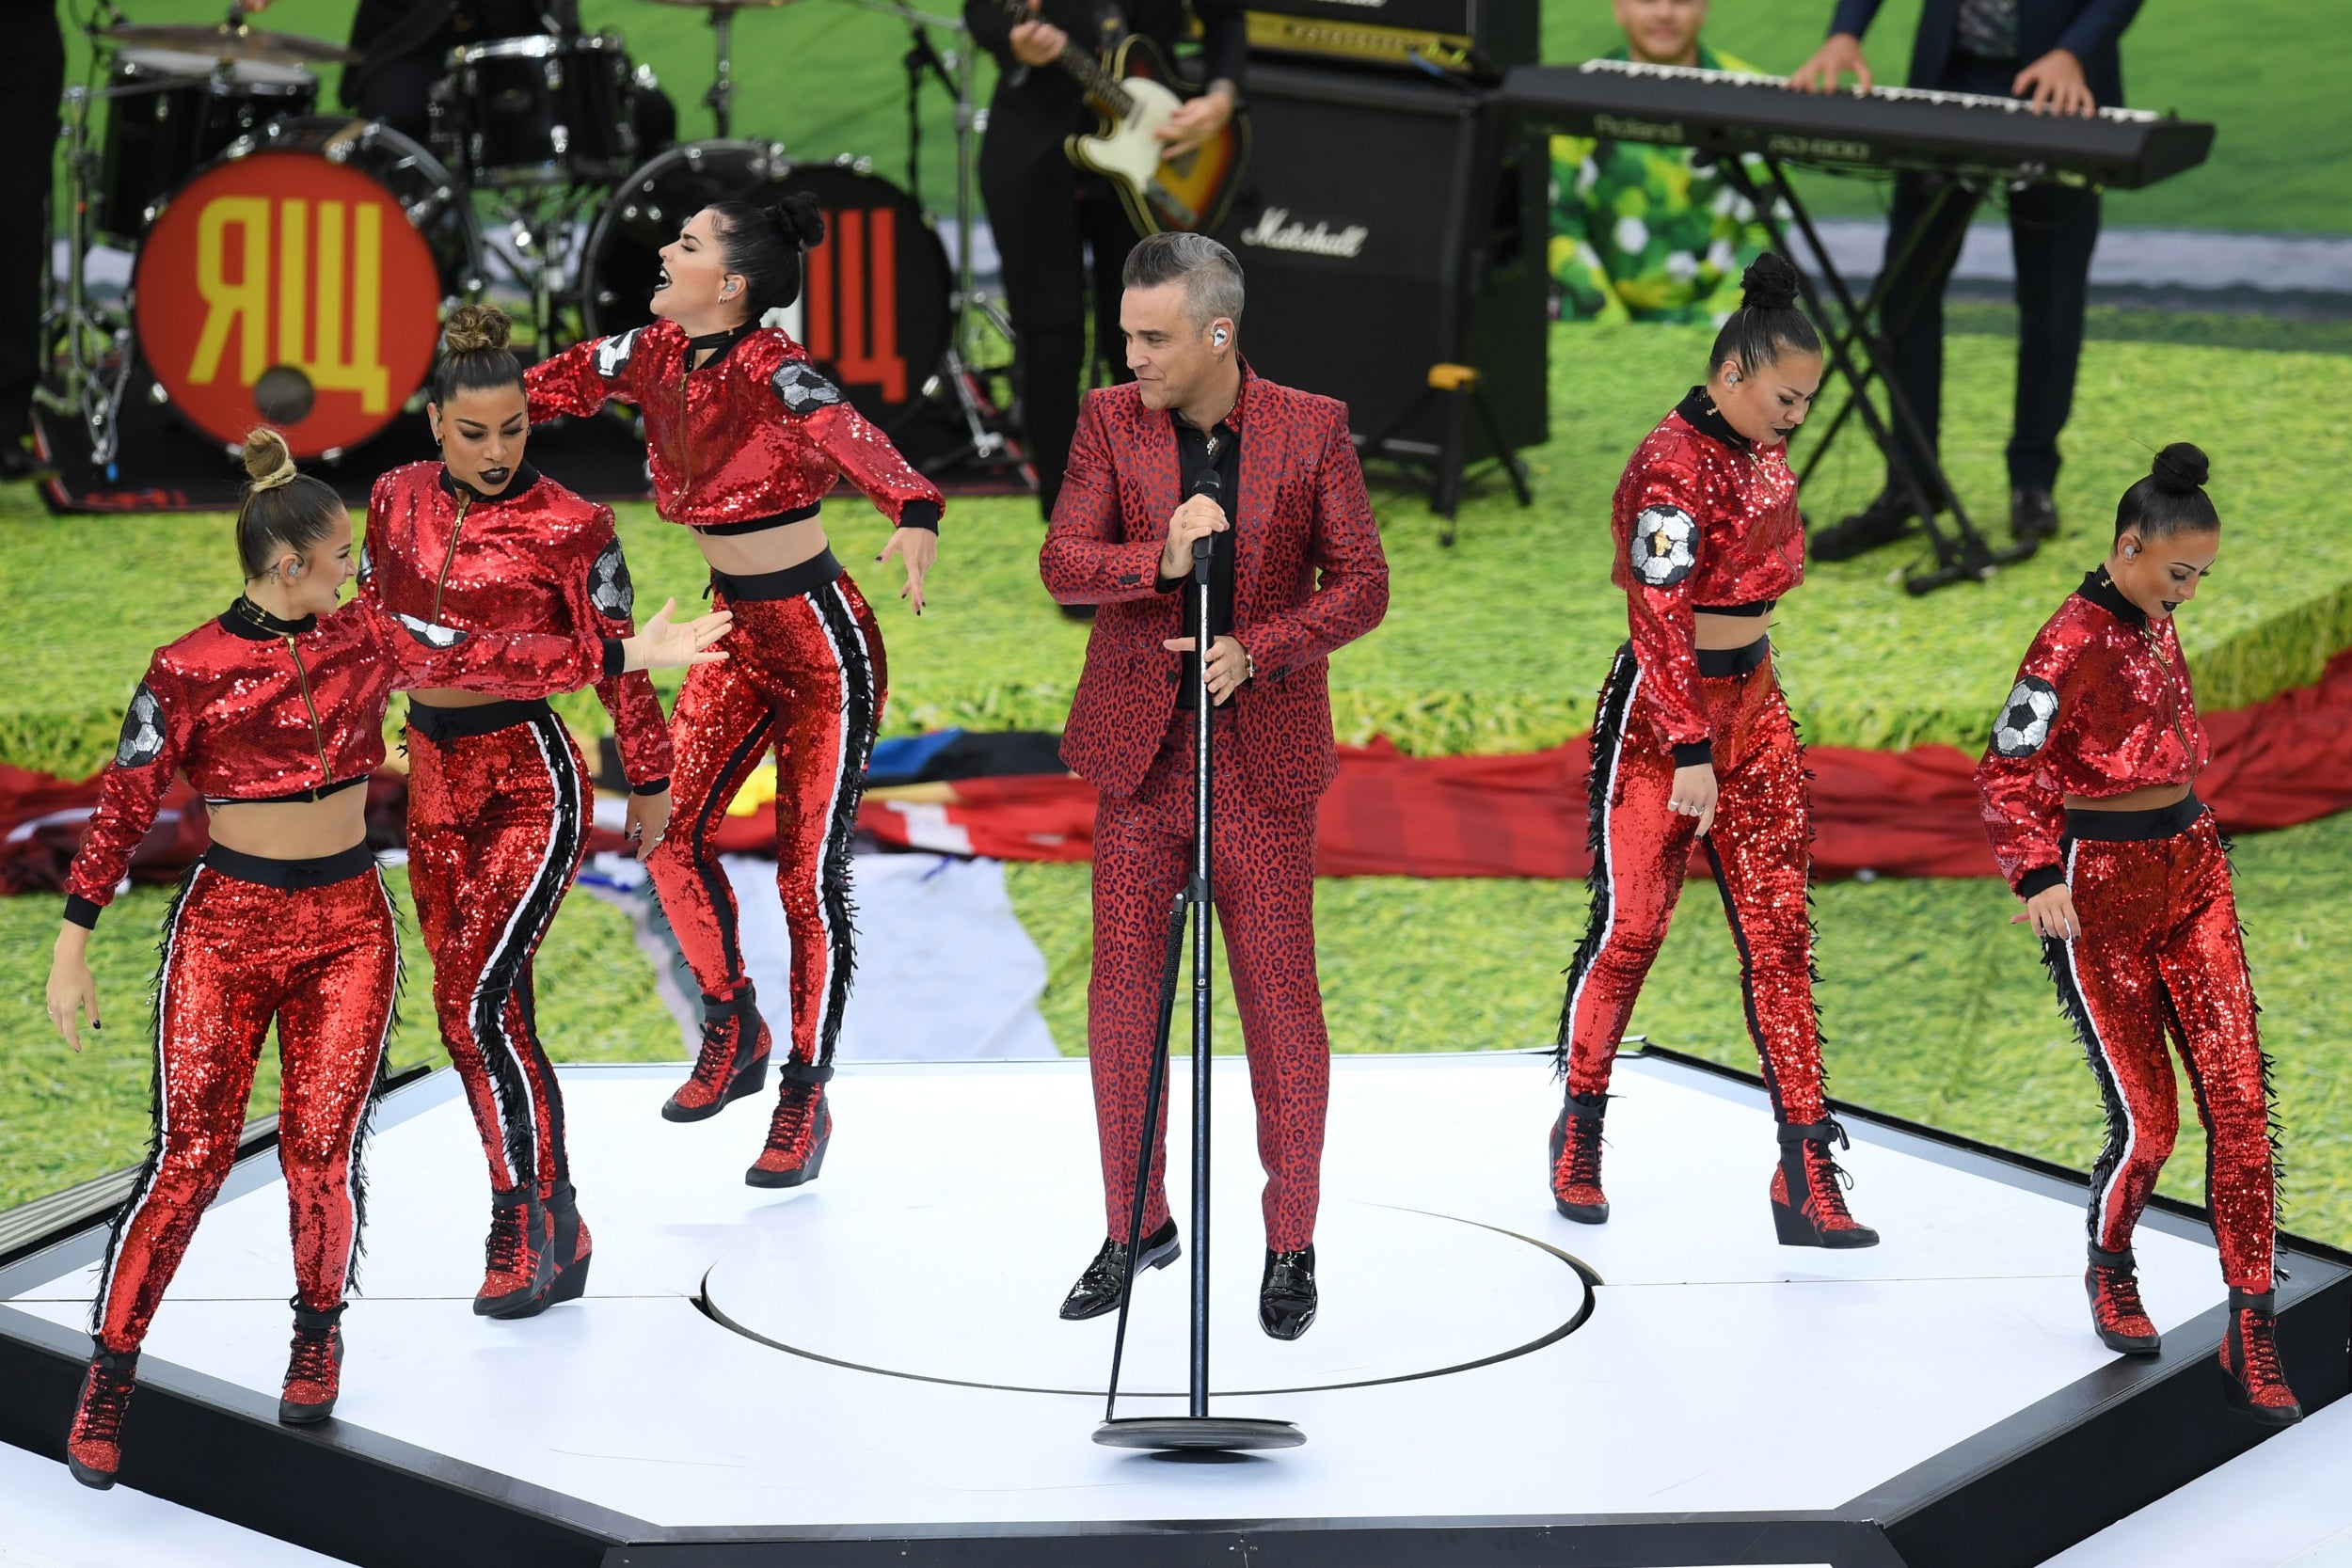 If you think Robbie Williams looked charismatic, wait until the Tories gets there